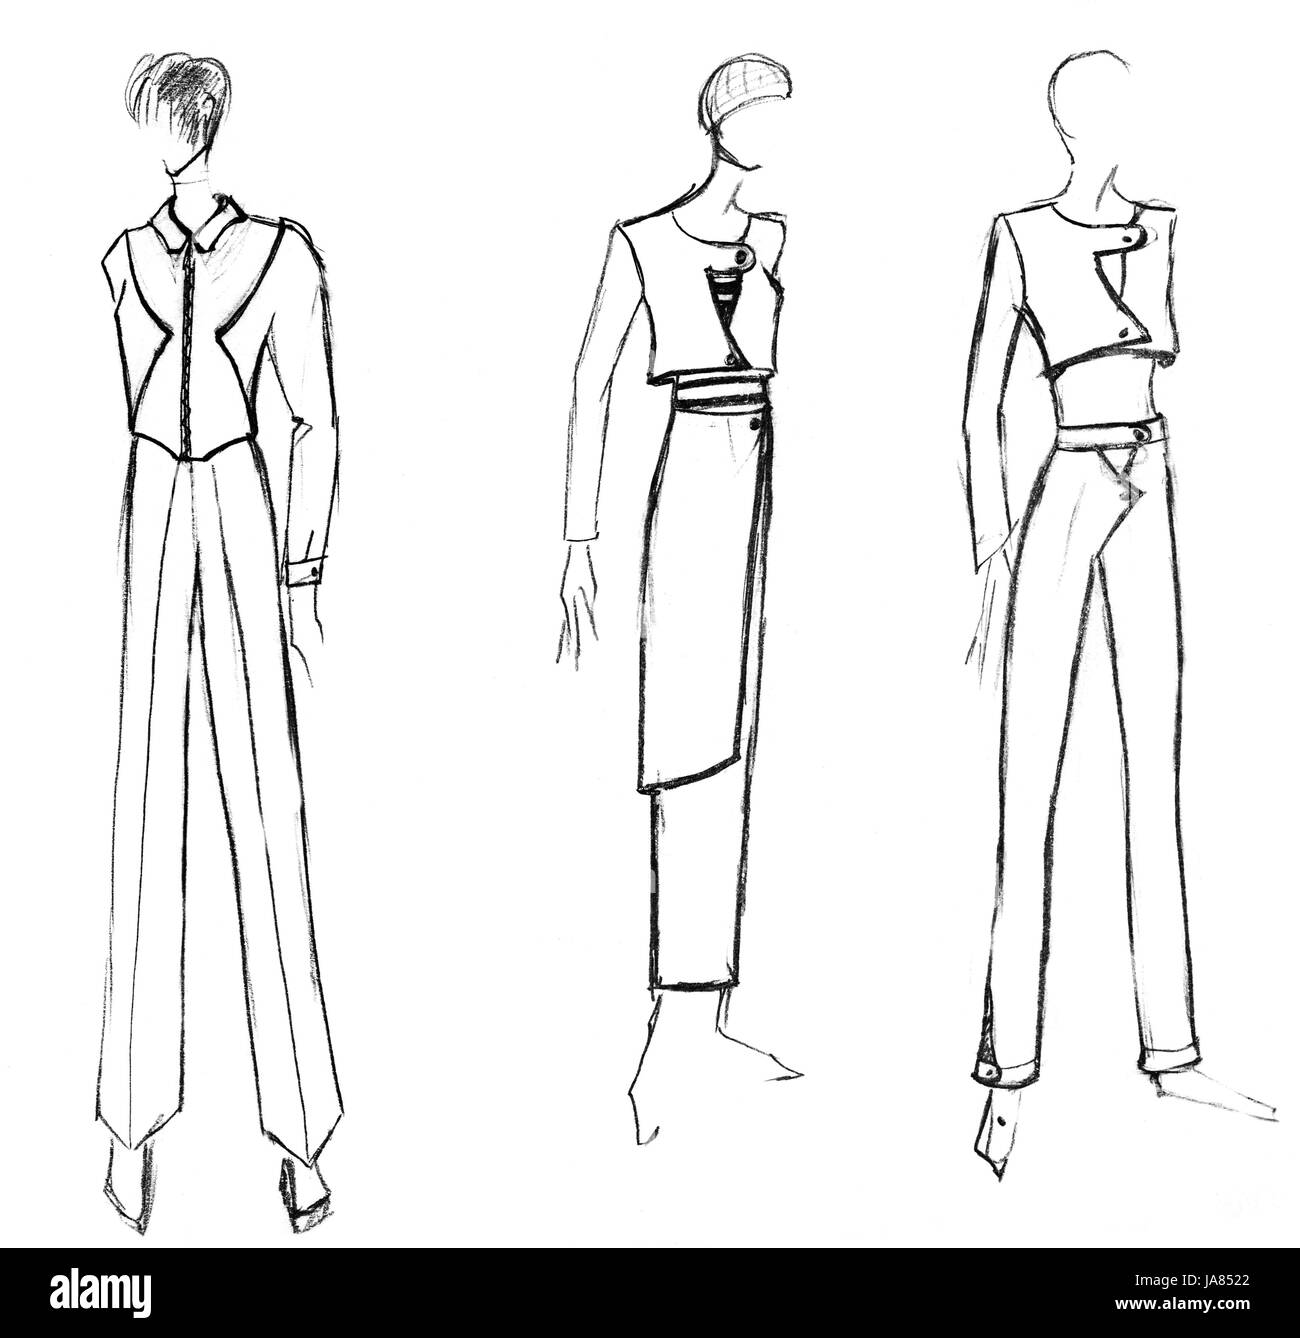 How To Draw Fashion Models For Designing